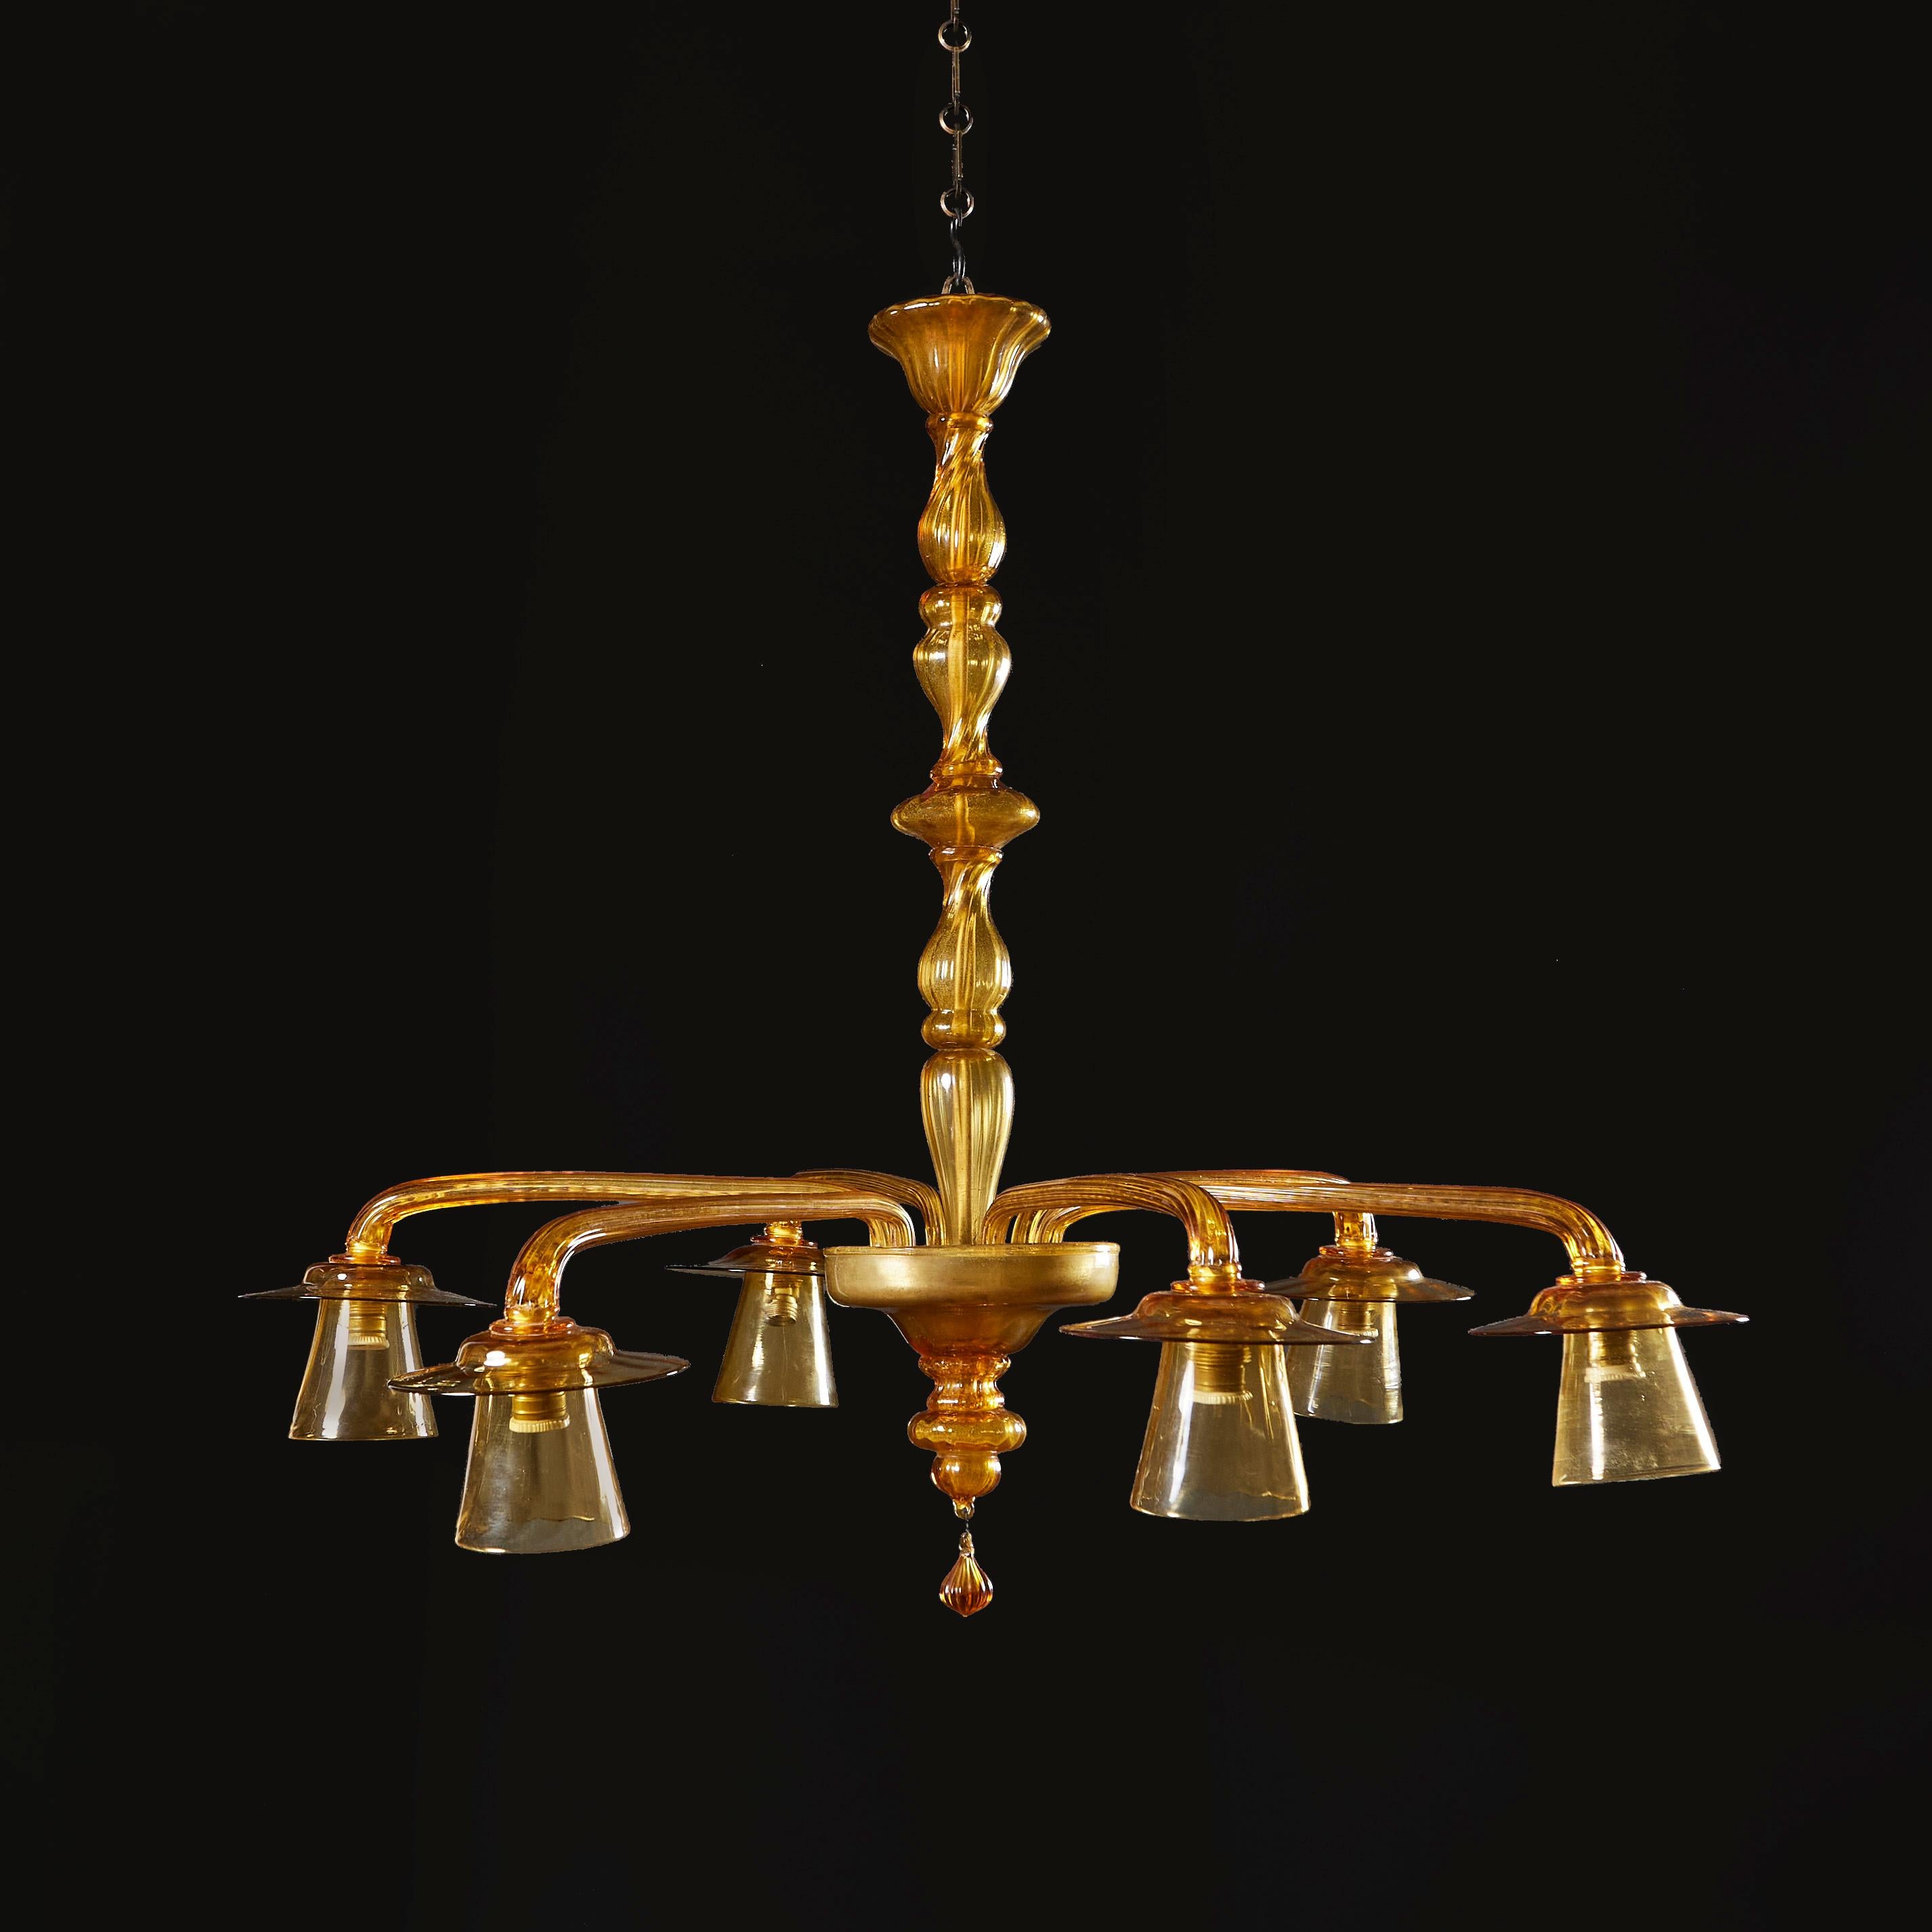 Italy, circa 1930

A fine early twentieth century Murano chandelier after Vittorio Zecchin in amber glass, with six inverted arms with glass shades, the central stem gadrooned and twisting, and all terminating in inverted dome with teardrop finial